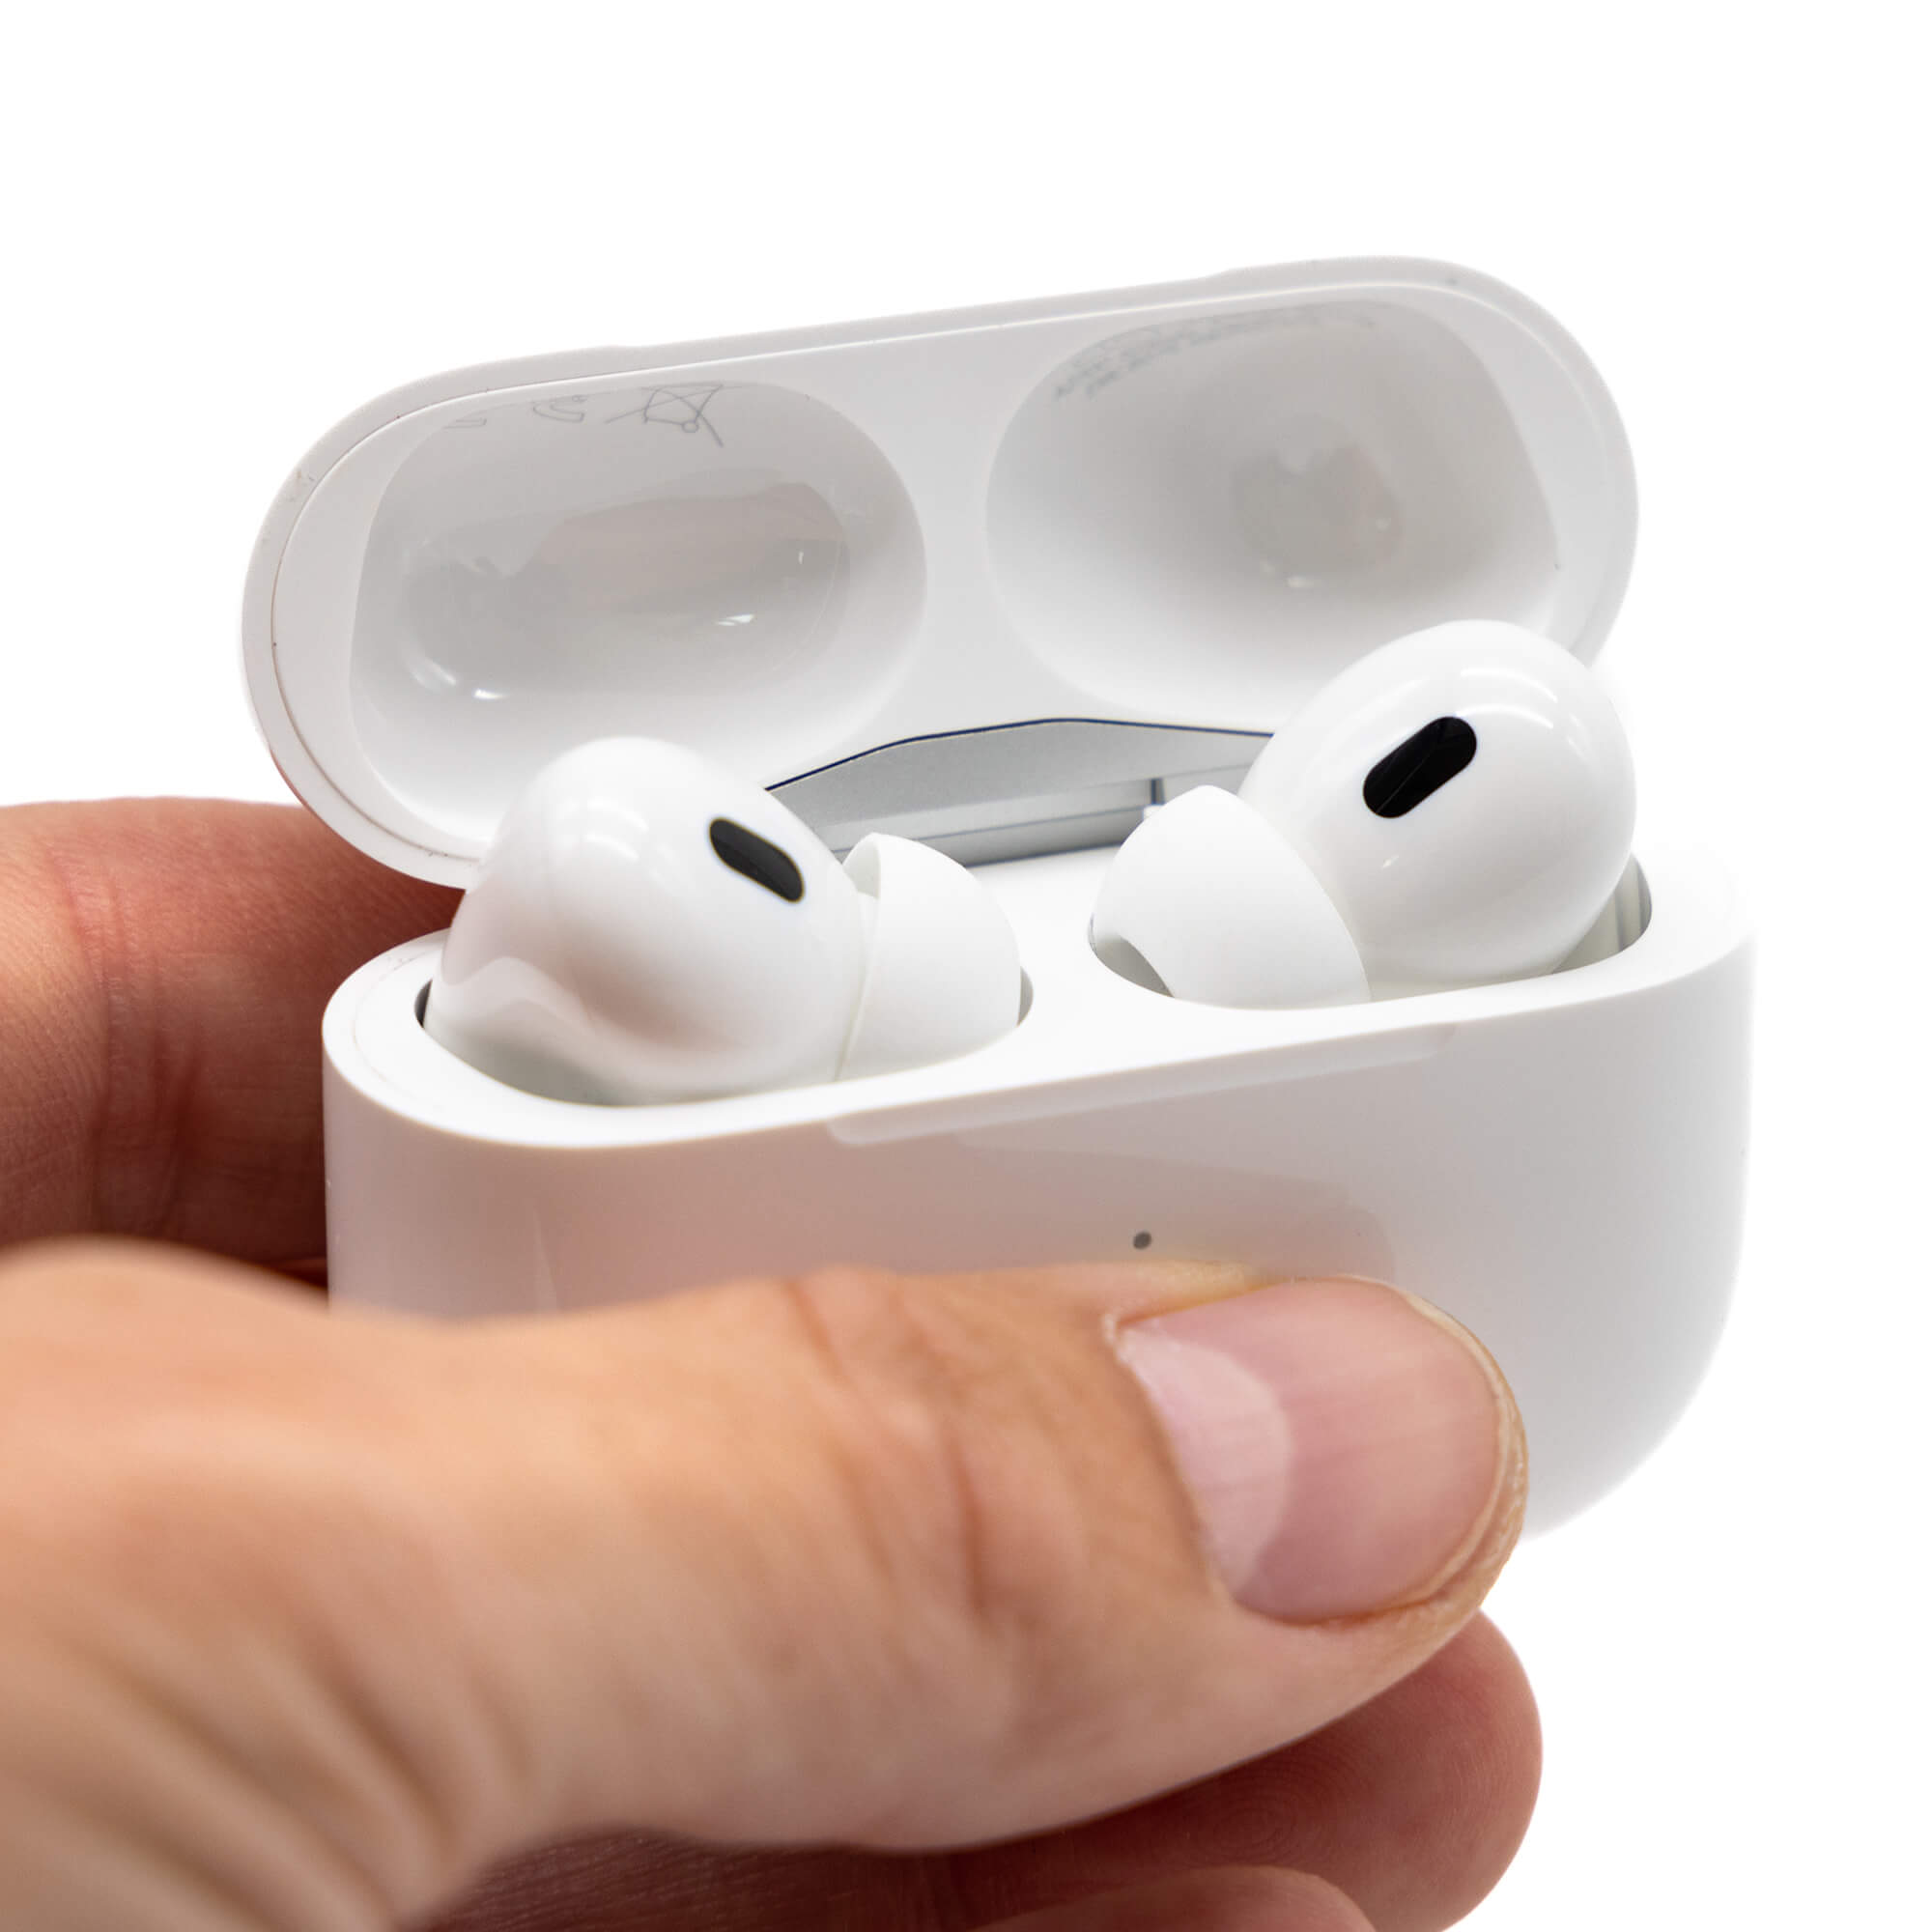 Apple Airpods Pro 2nd Gen w/ MagSafe Wireless Charging Case (Brand New)